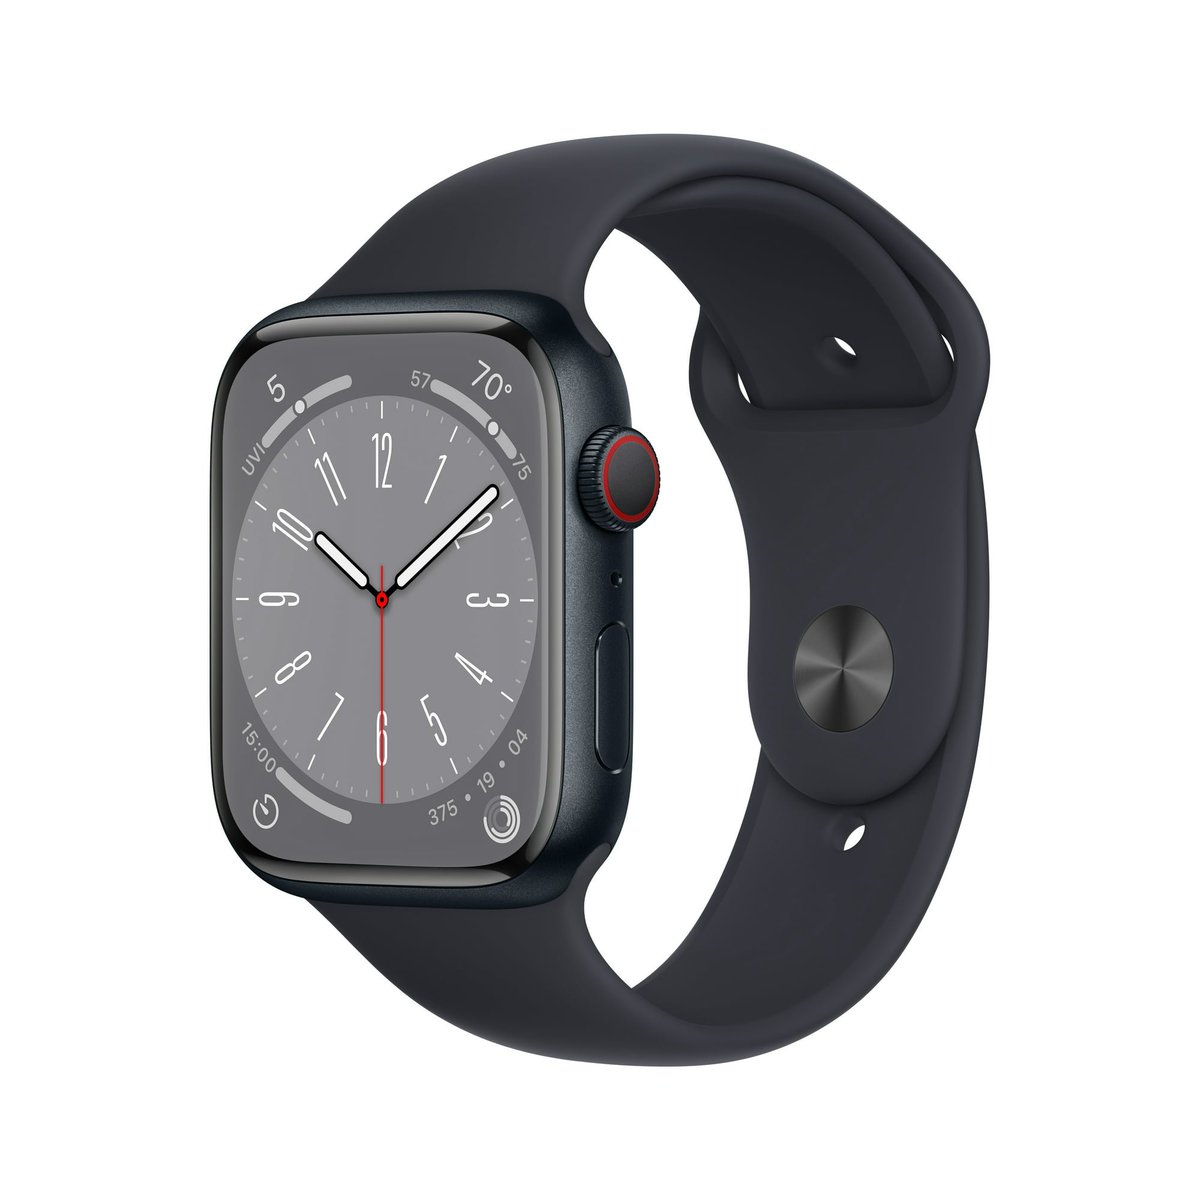 Another Apple Watch deal if you're looking for a 45mm model: Apple Watch Series 8 GPS + Cellular 45mm Midnight Aluminum Case is $329 at Walmart (was $529) zdcs.link/gP488